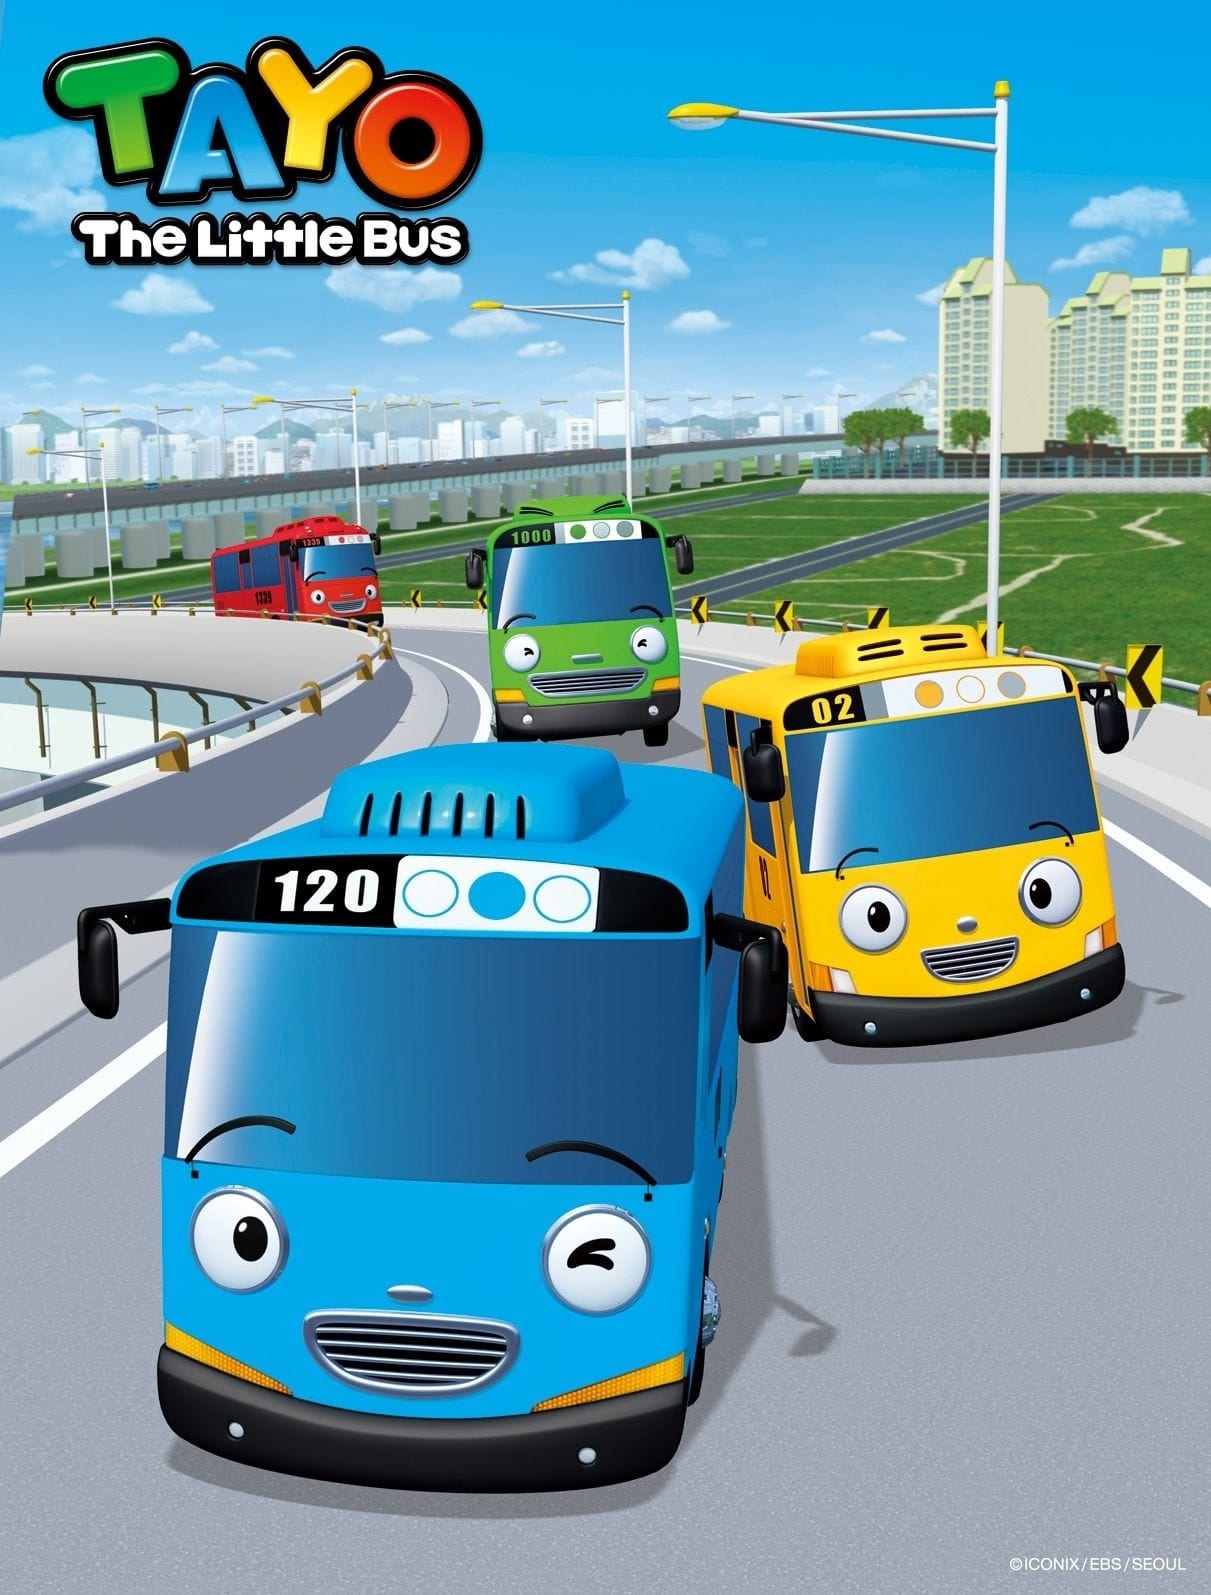 Tayo the Little Bus (2010)